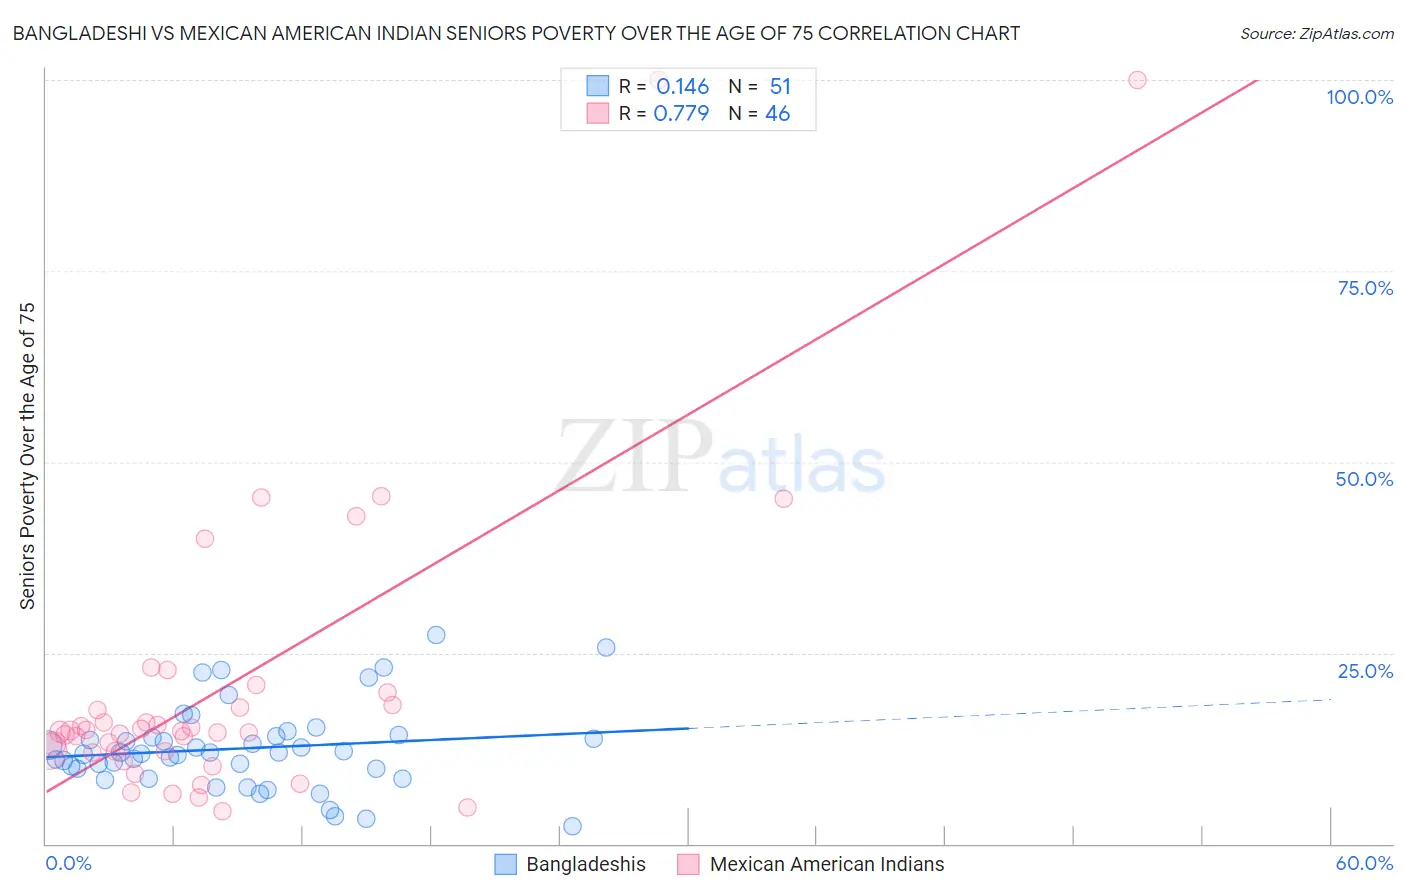 Bangladeshi vs Mexican American Indian Seniors Poverty Over the Age of 75